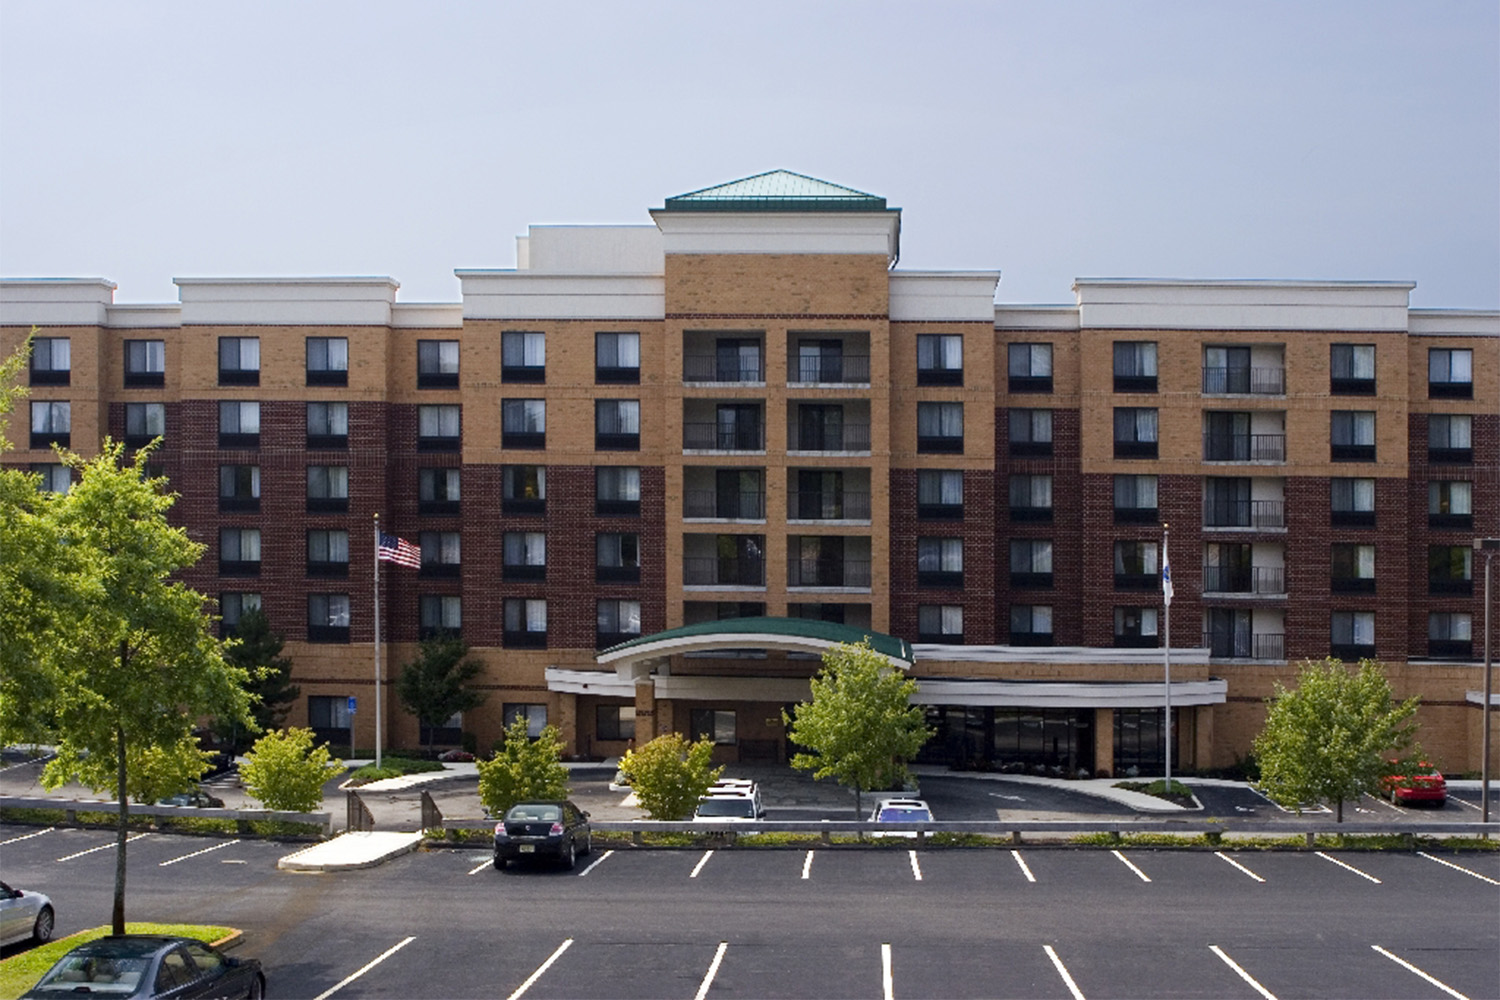 exterior view of the Marriott hotel in Woburn, seen from across parking lot 